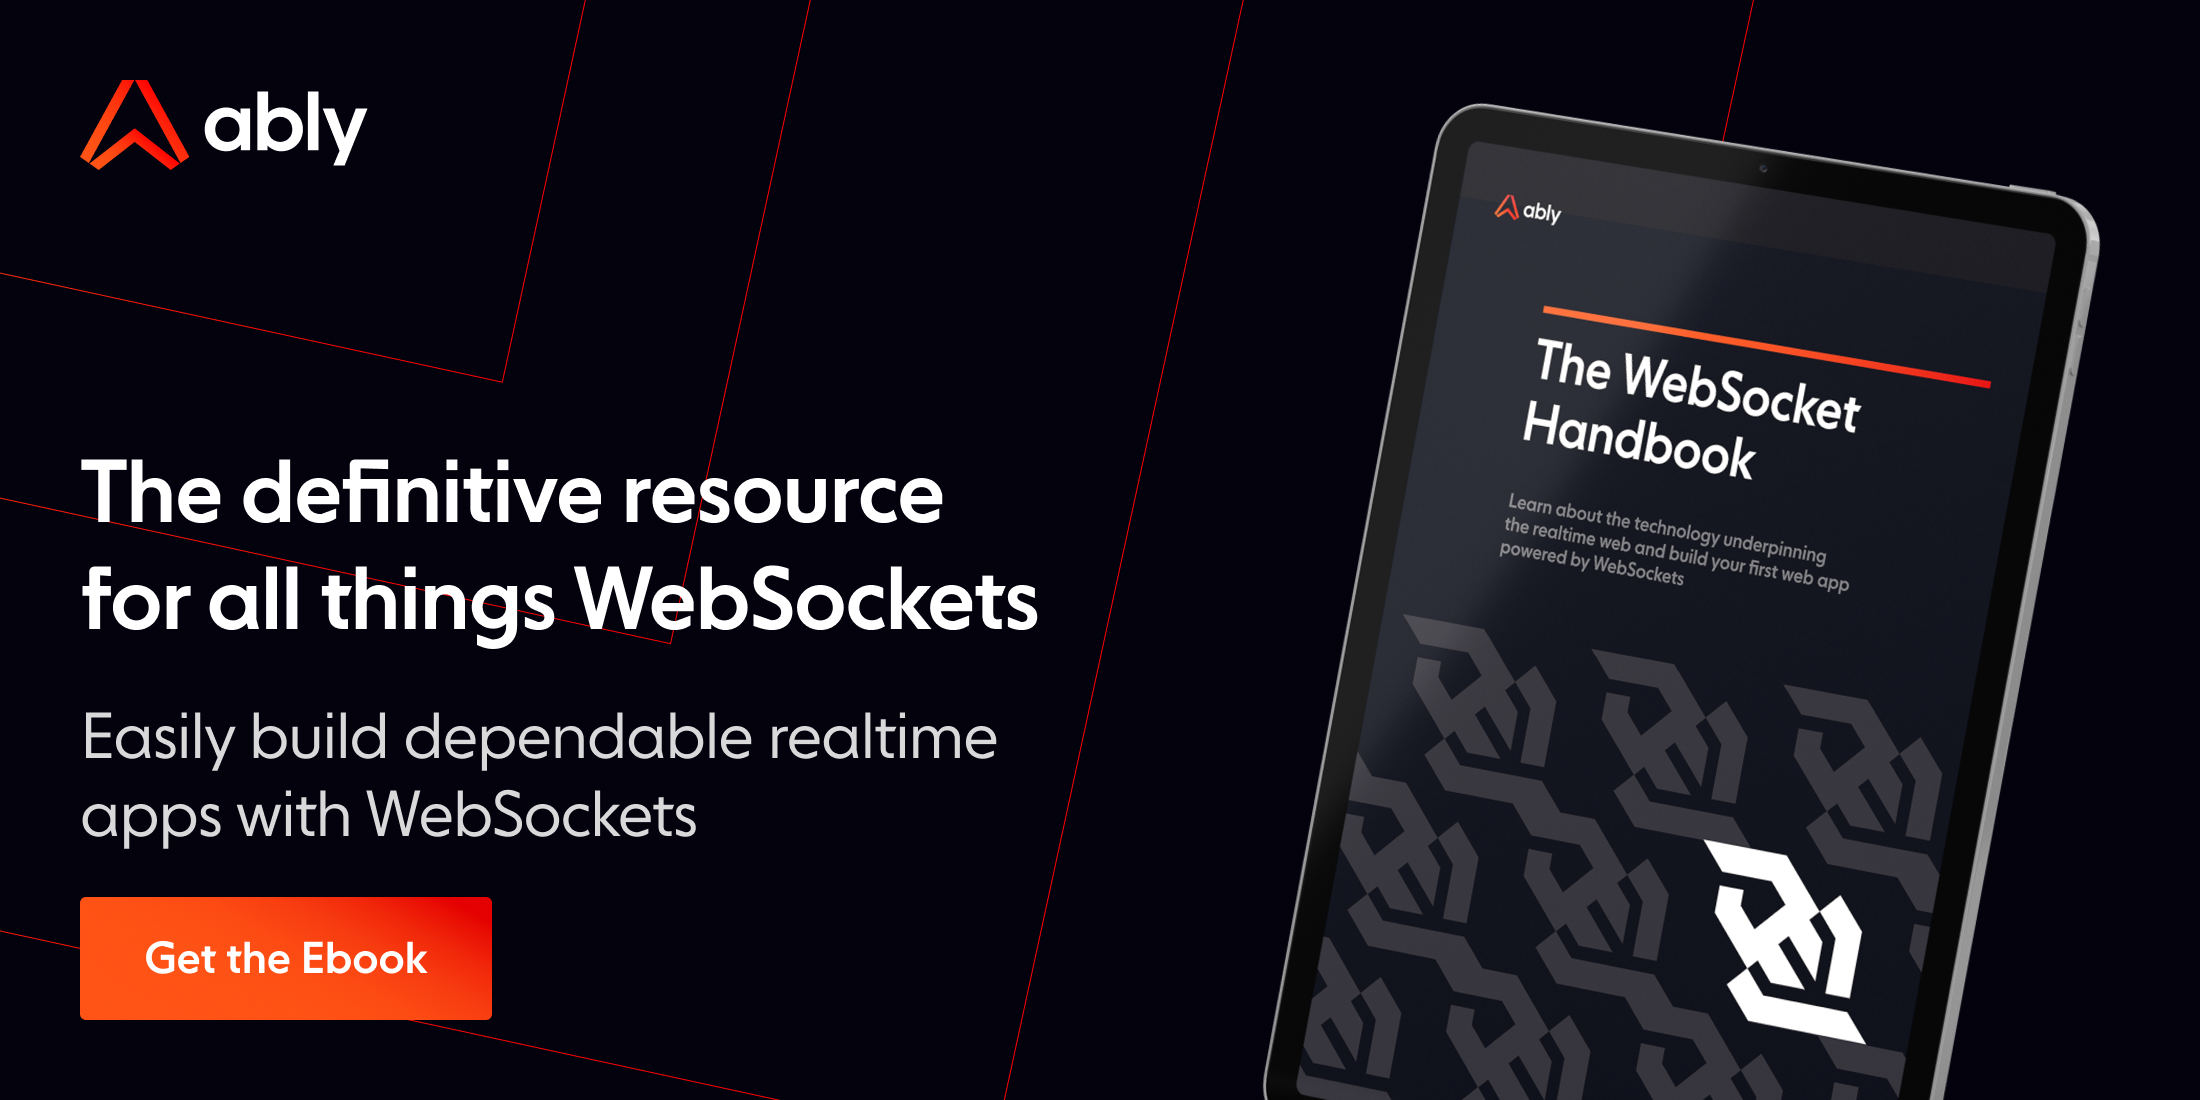 The WebSocket Handbook: learn about the technology behind the realtime web image